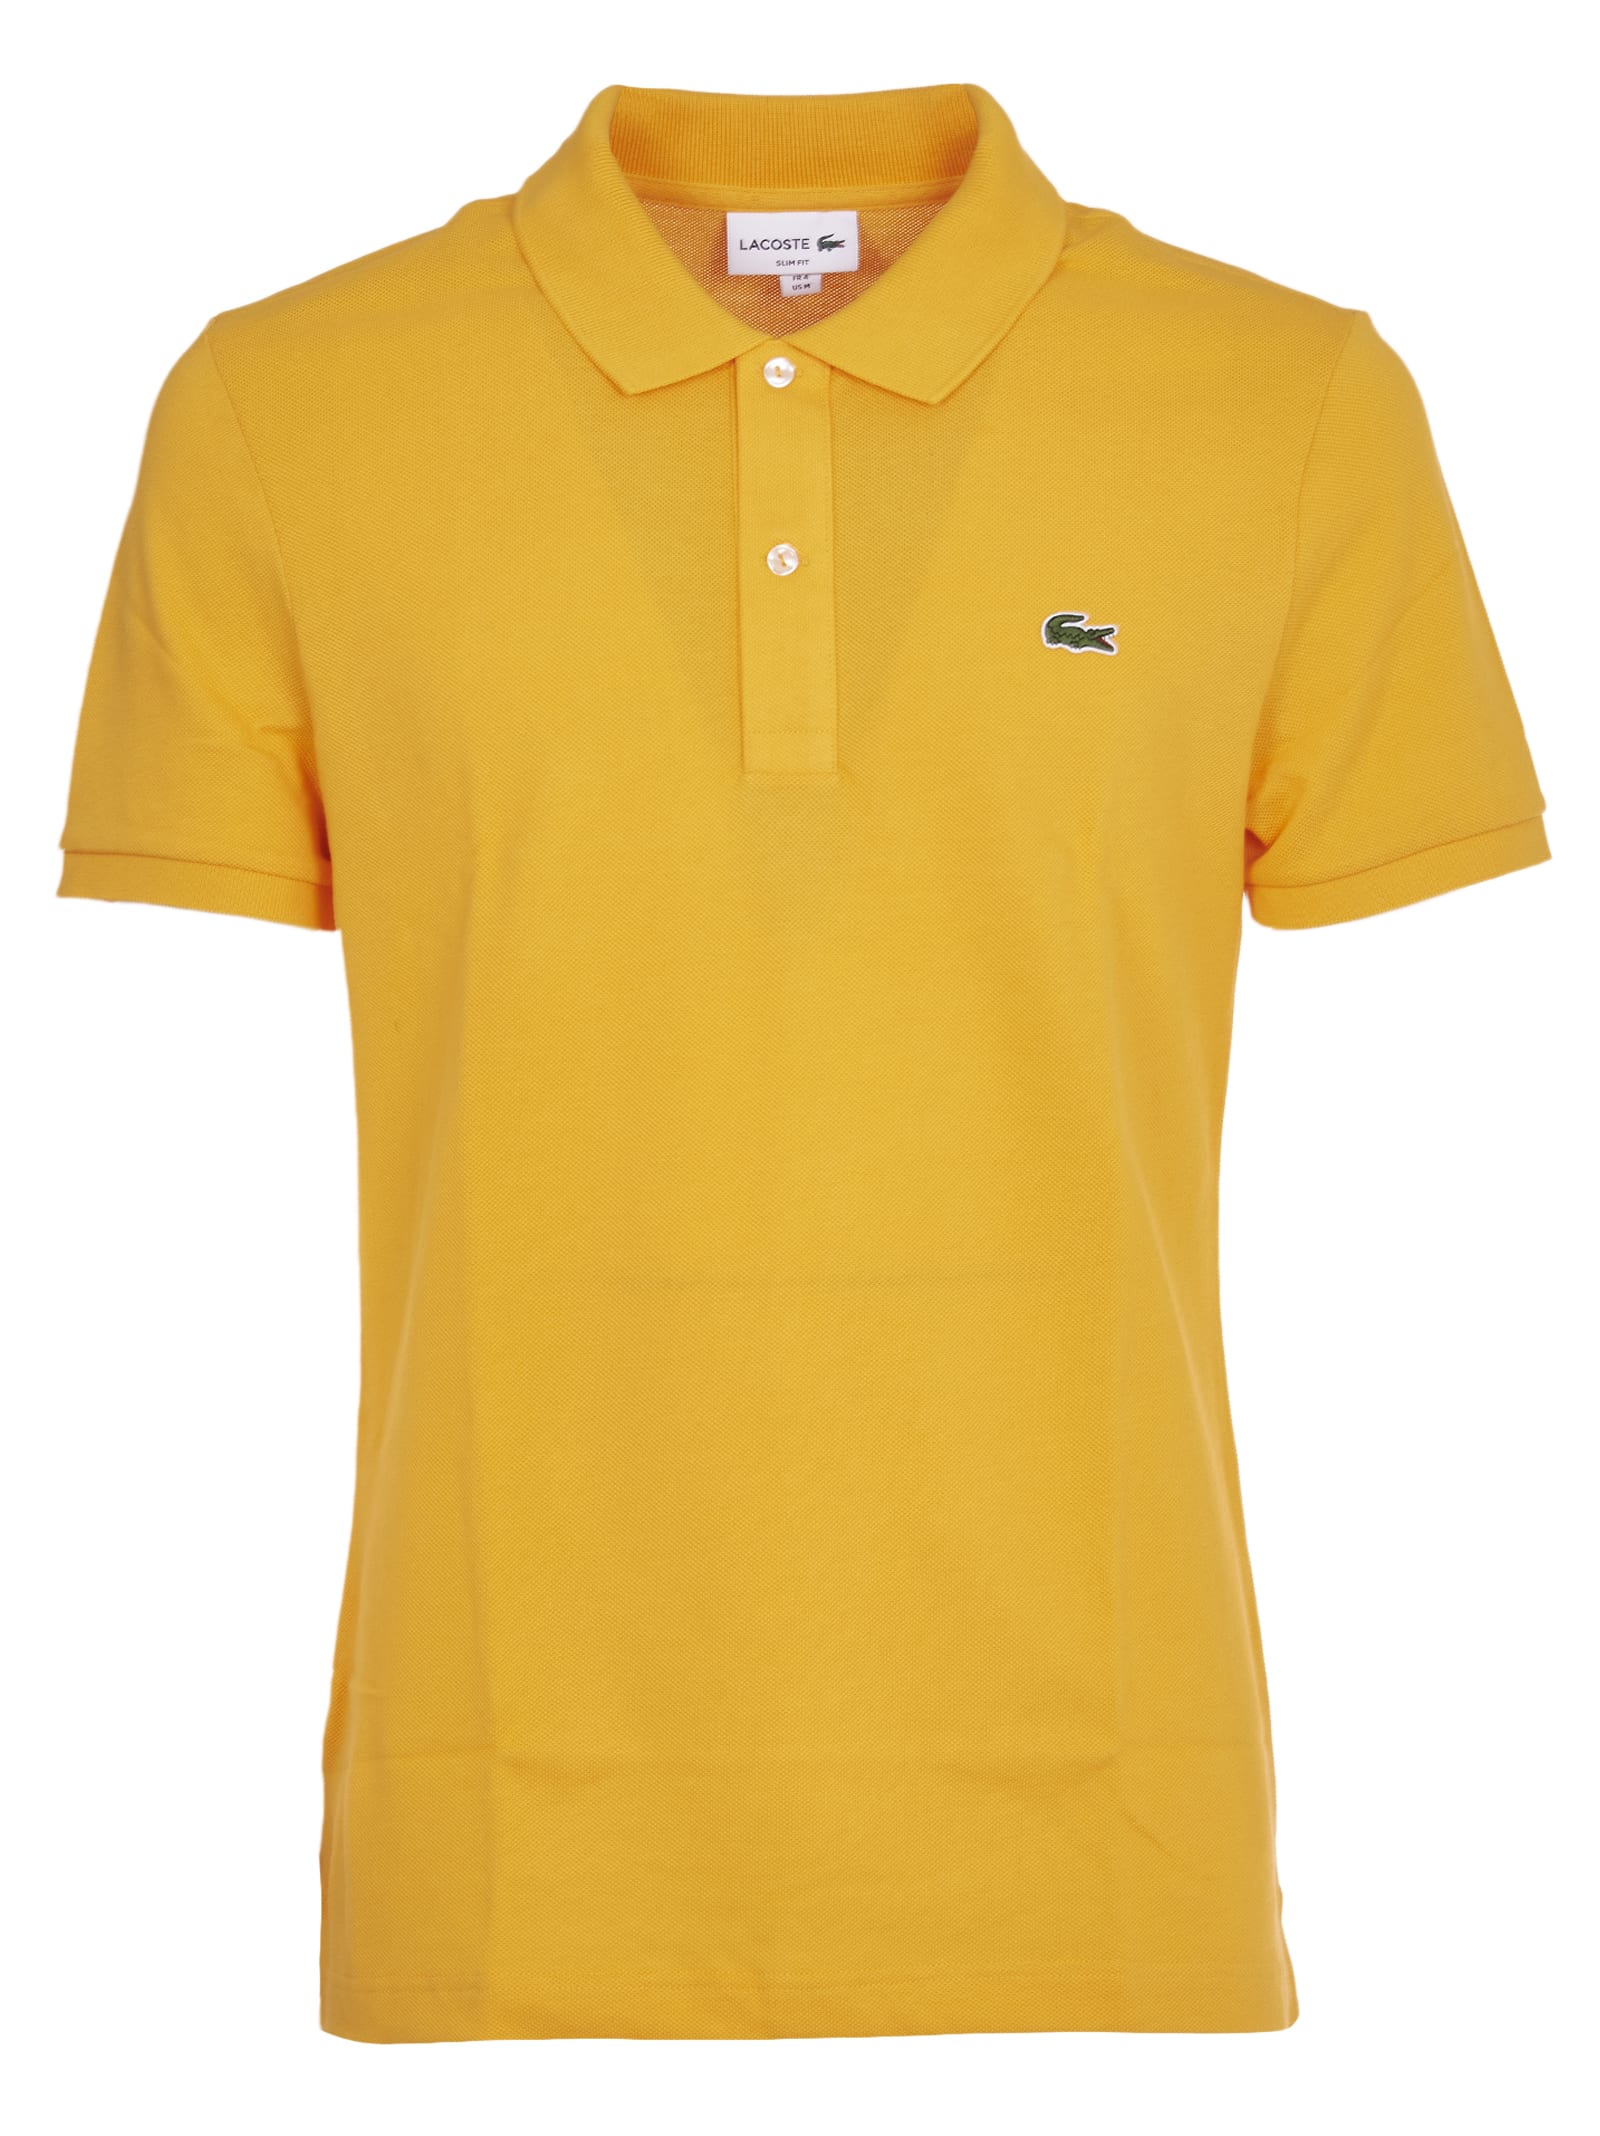 LACOSTE YELLOW SLIM FIT POLO,PH4012SS20 /YZR